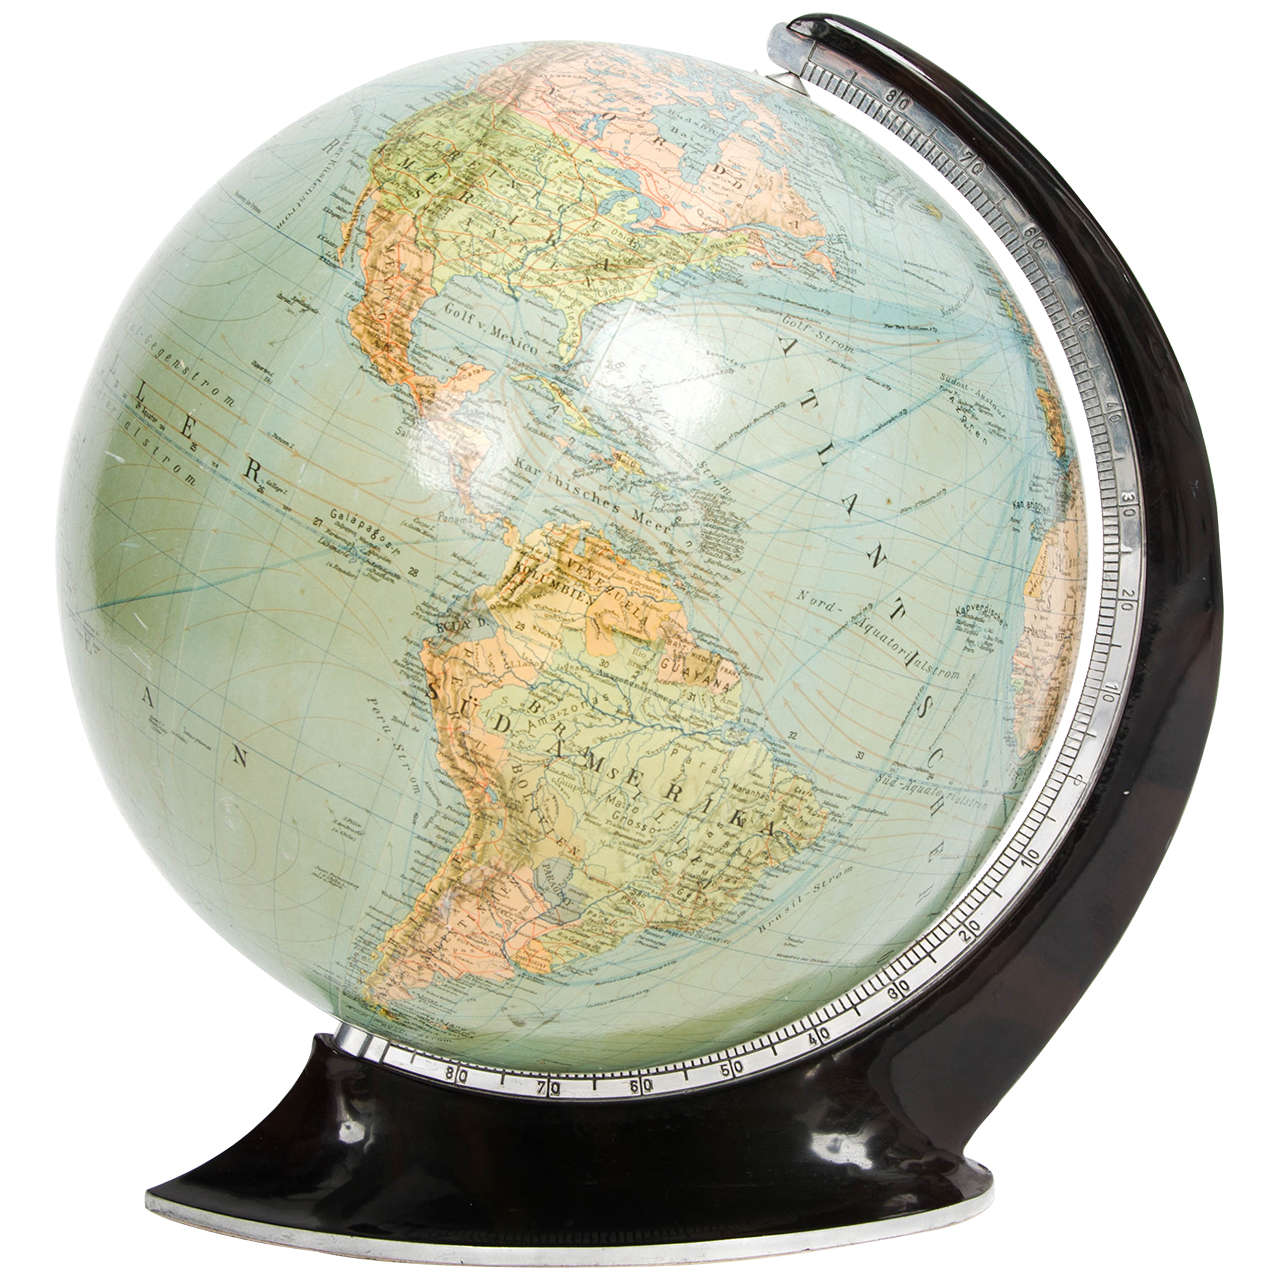 Art Deco style globe by Columbus of Germany. This globe has a glass sphere with paper coating; it has a bakelite and steel frame and references are in German. It is believed to be a 1940s illuminating DUO model, which shows both the political and